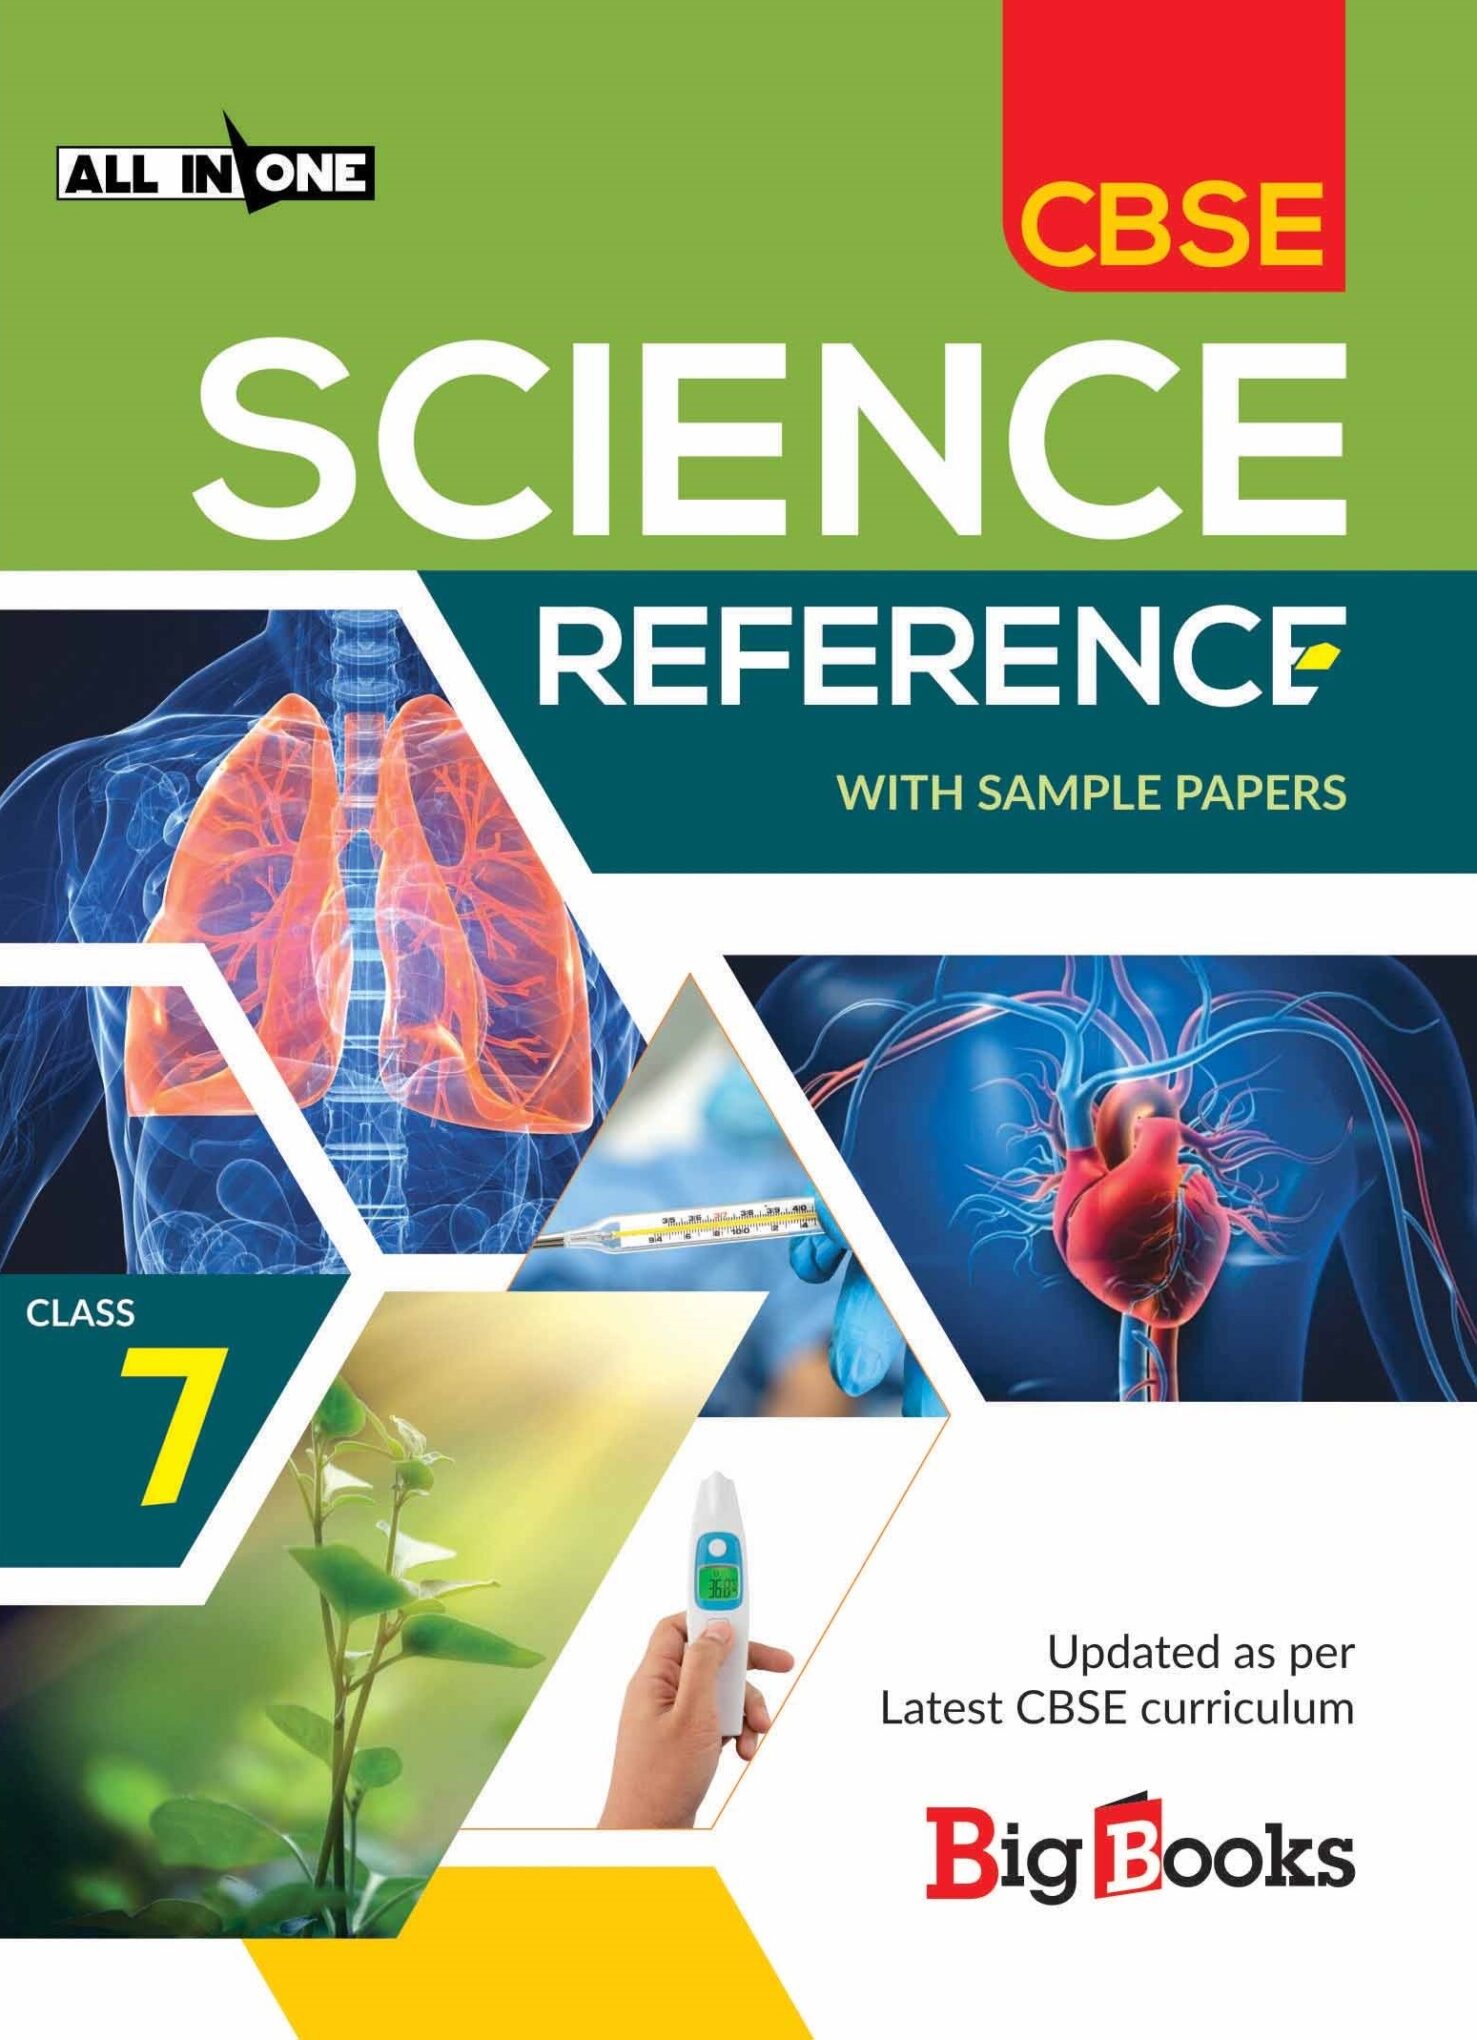 Best CBSE Social Science Reference book for 7